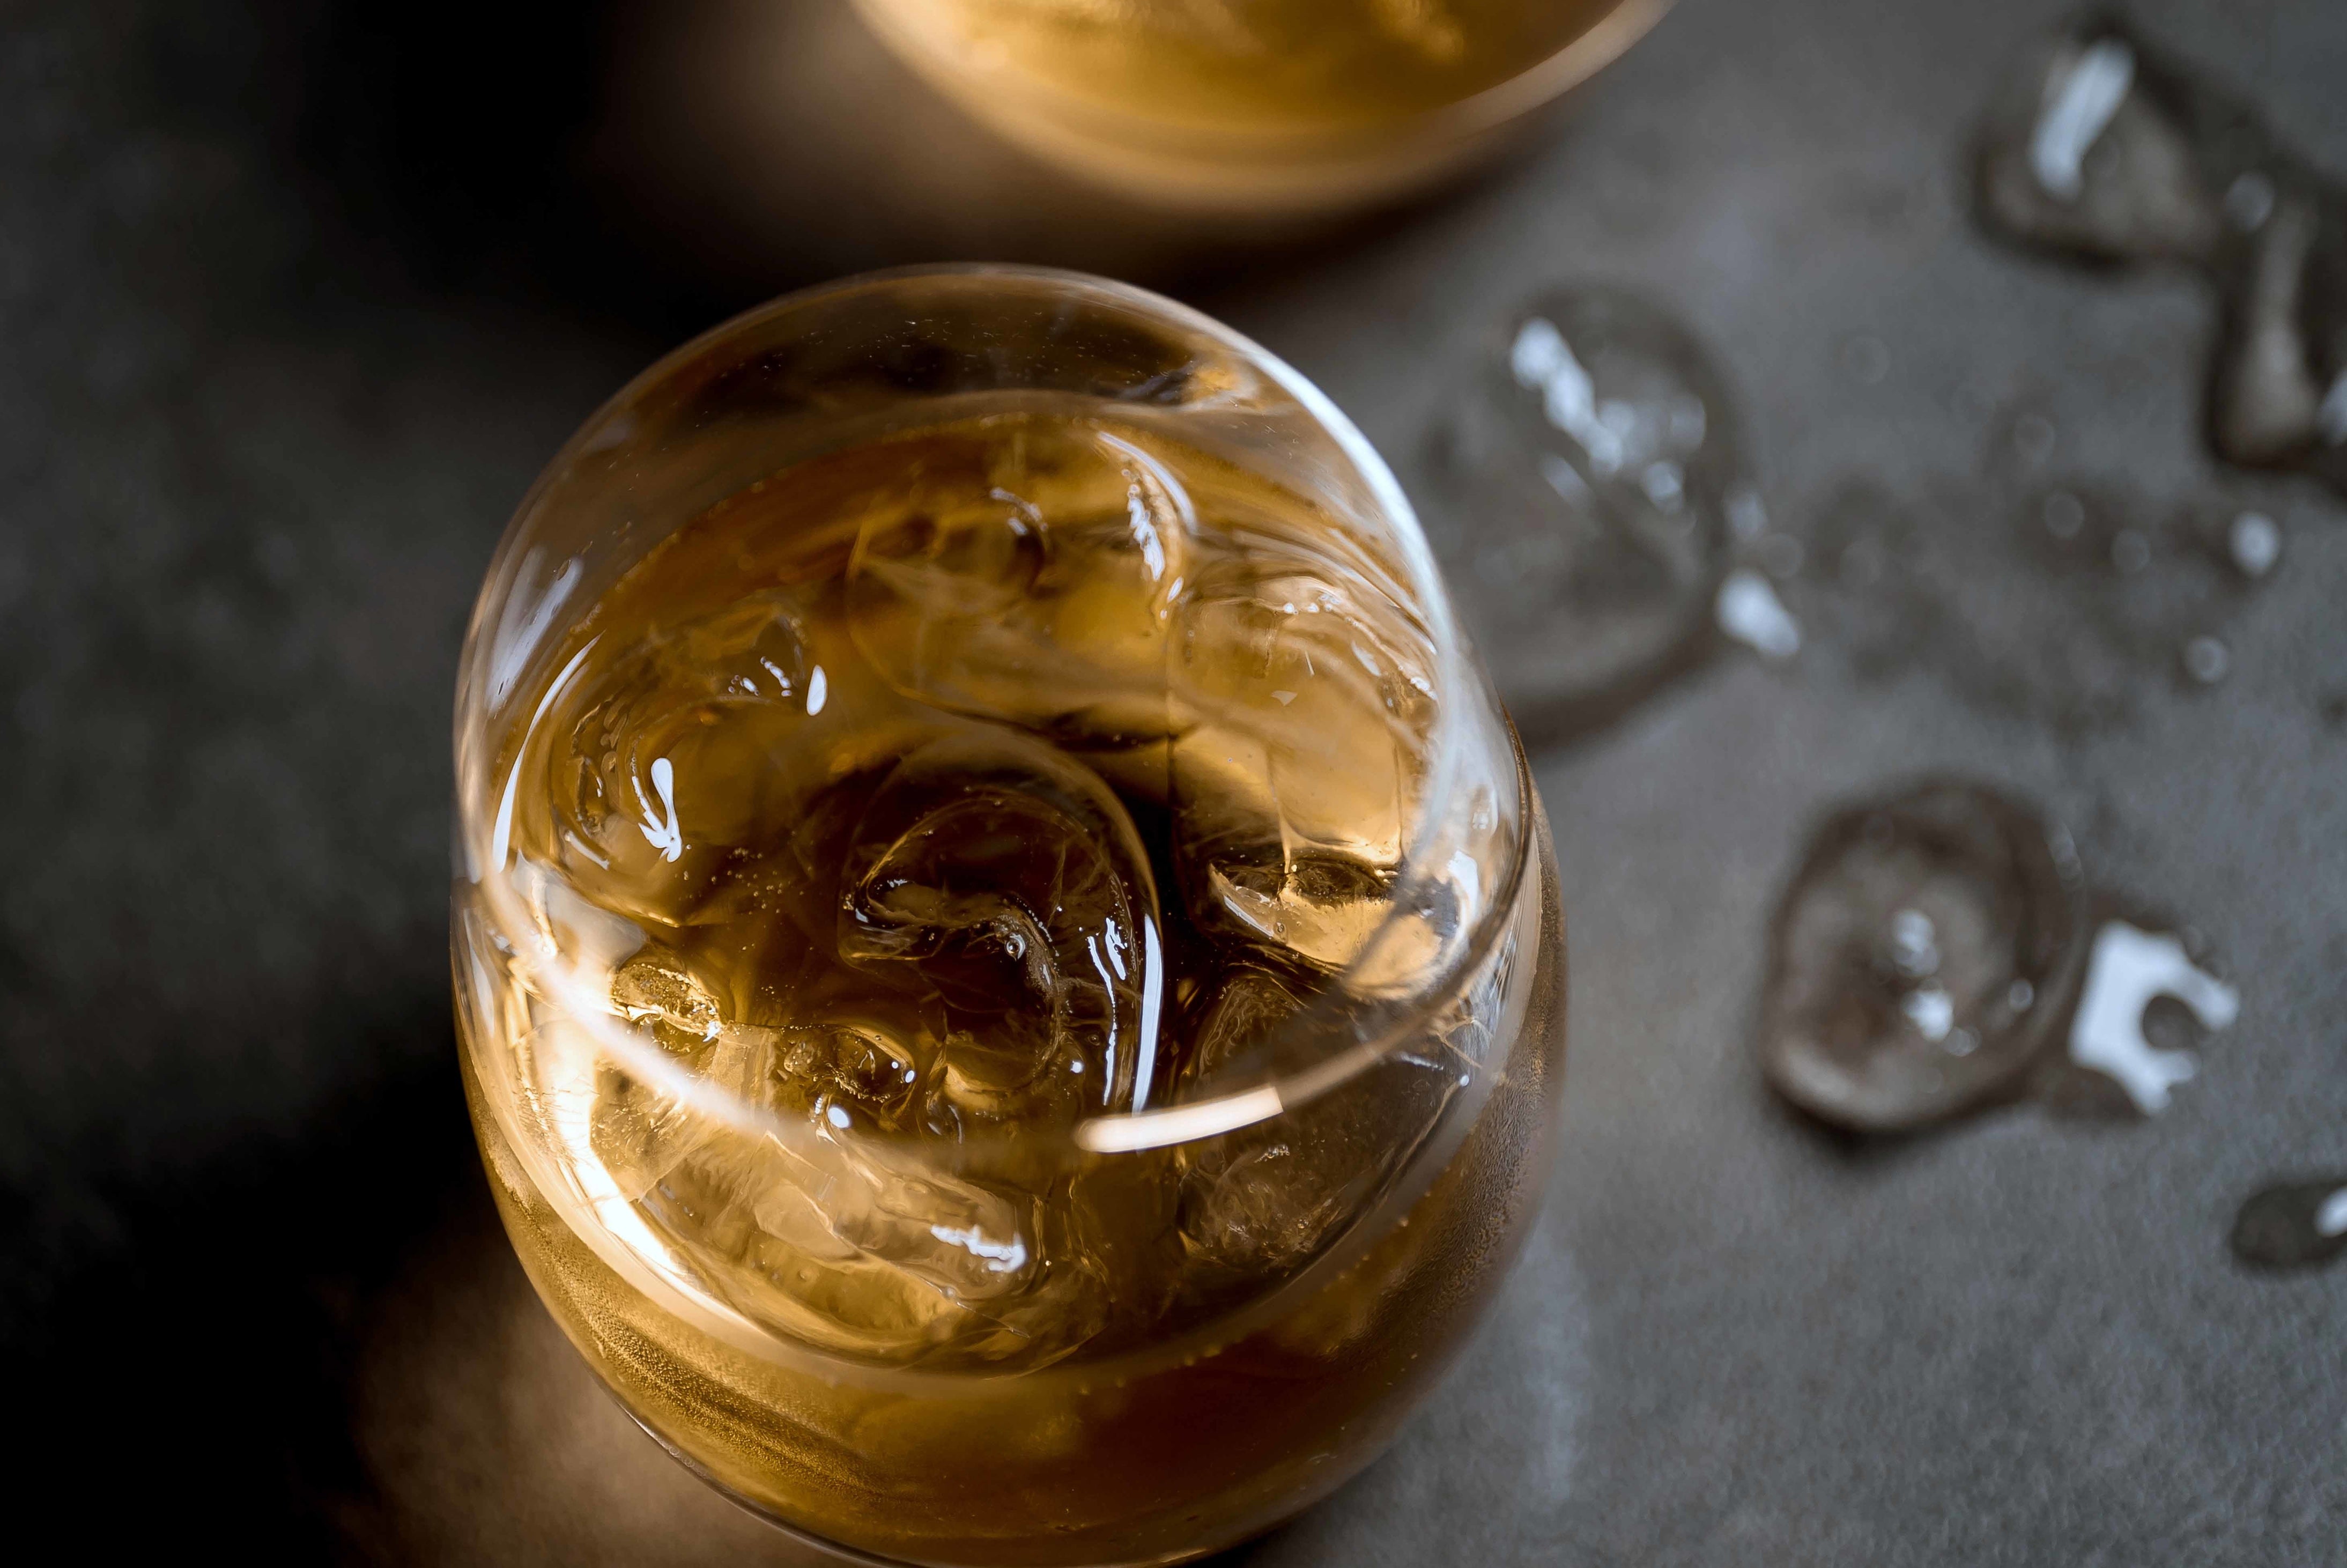 Whisky Tasting: Five Different Types of Glassware, One Whisky